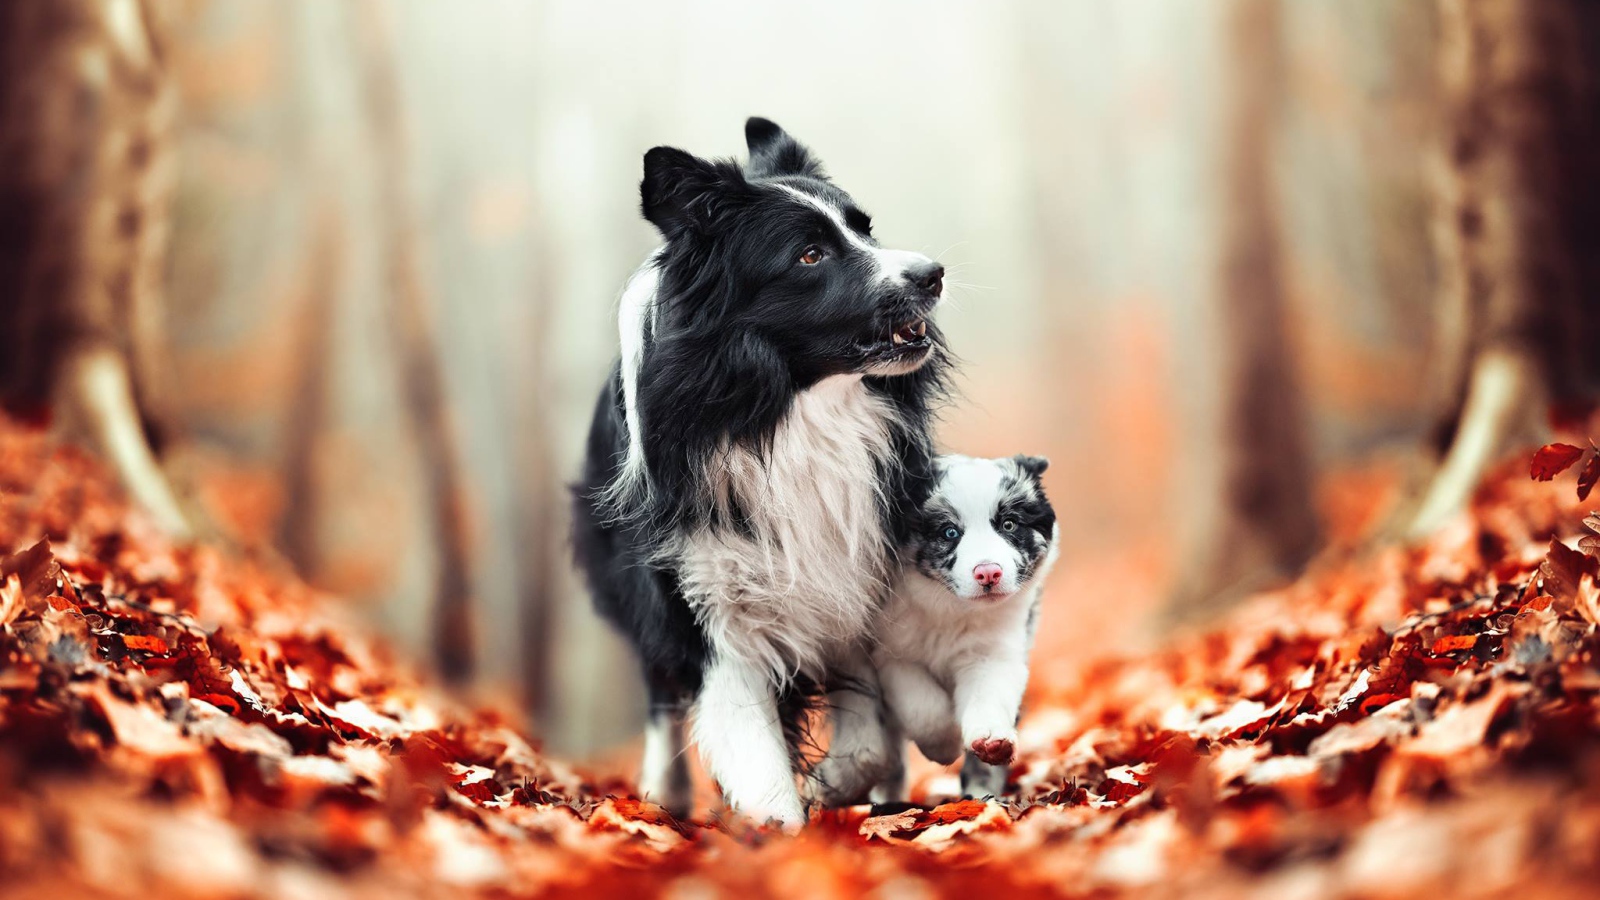 Dog border collie with a puppy walking on yellow leaves